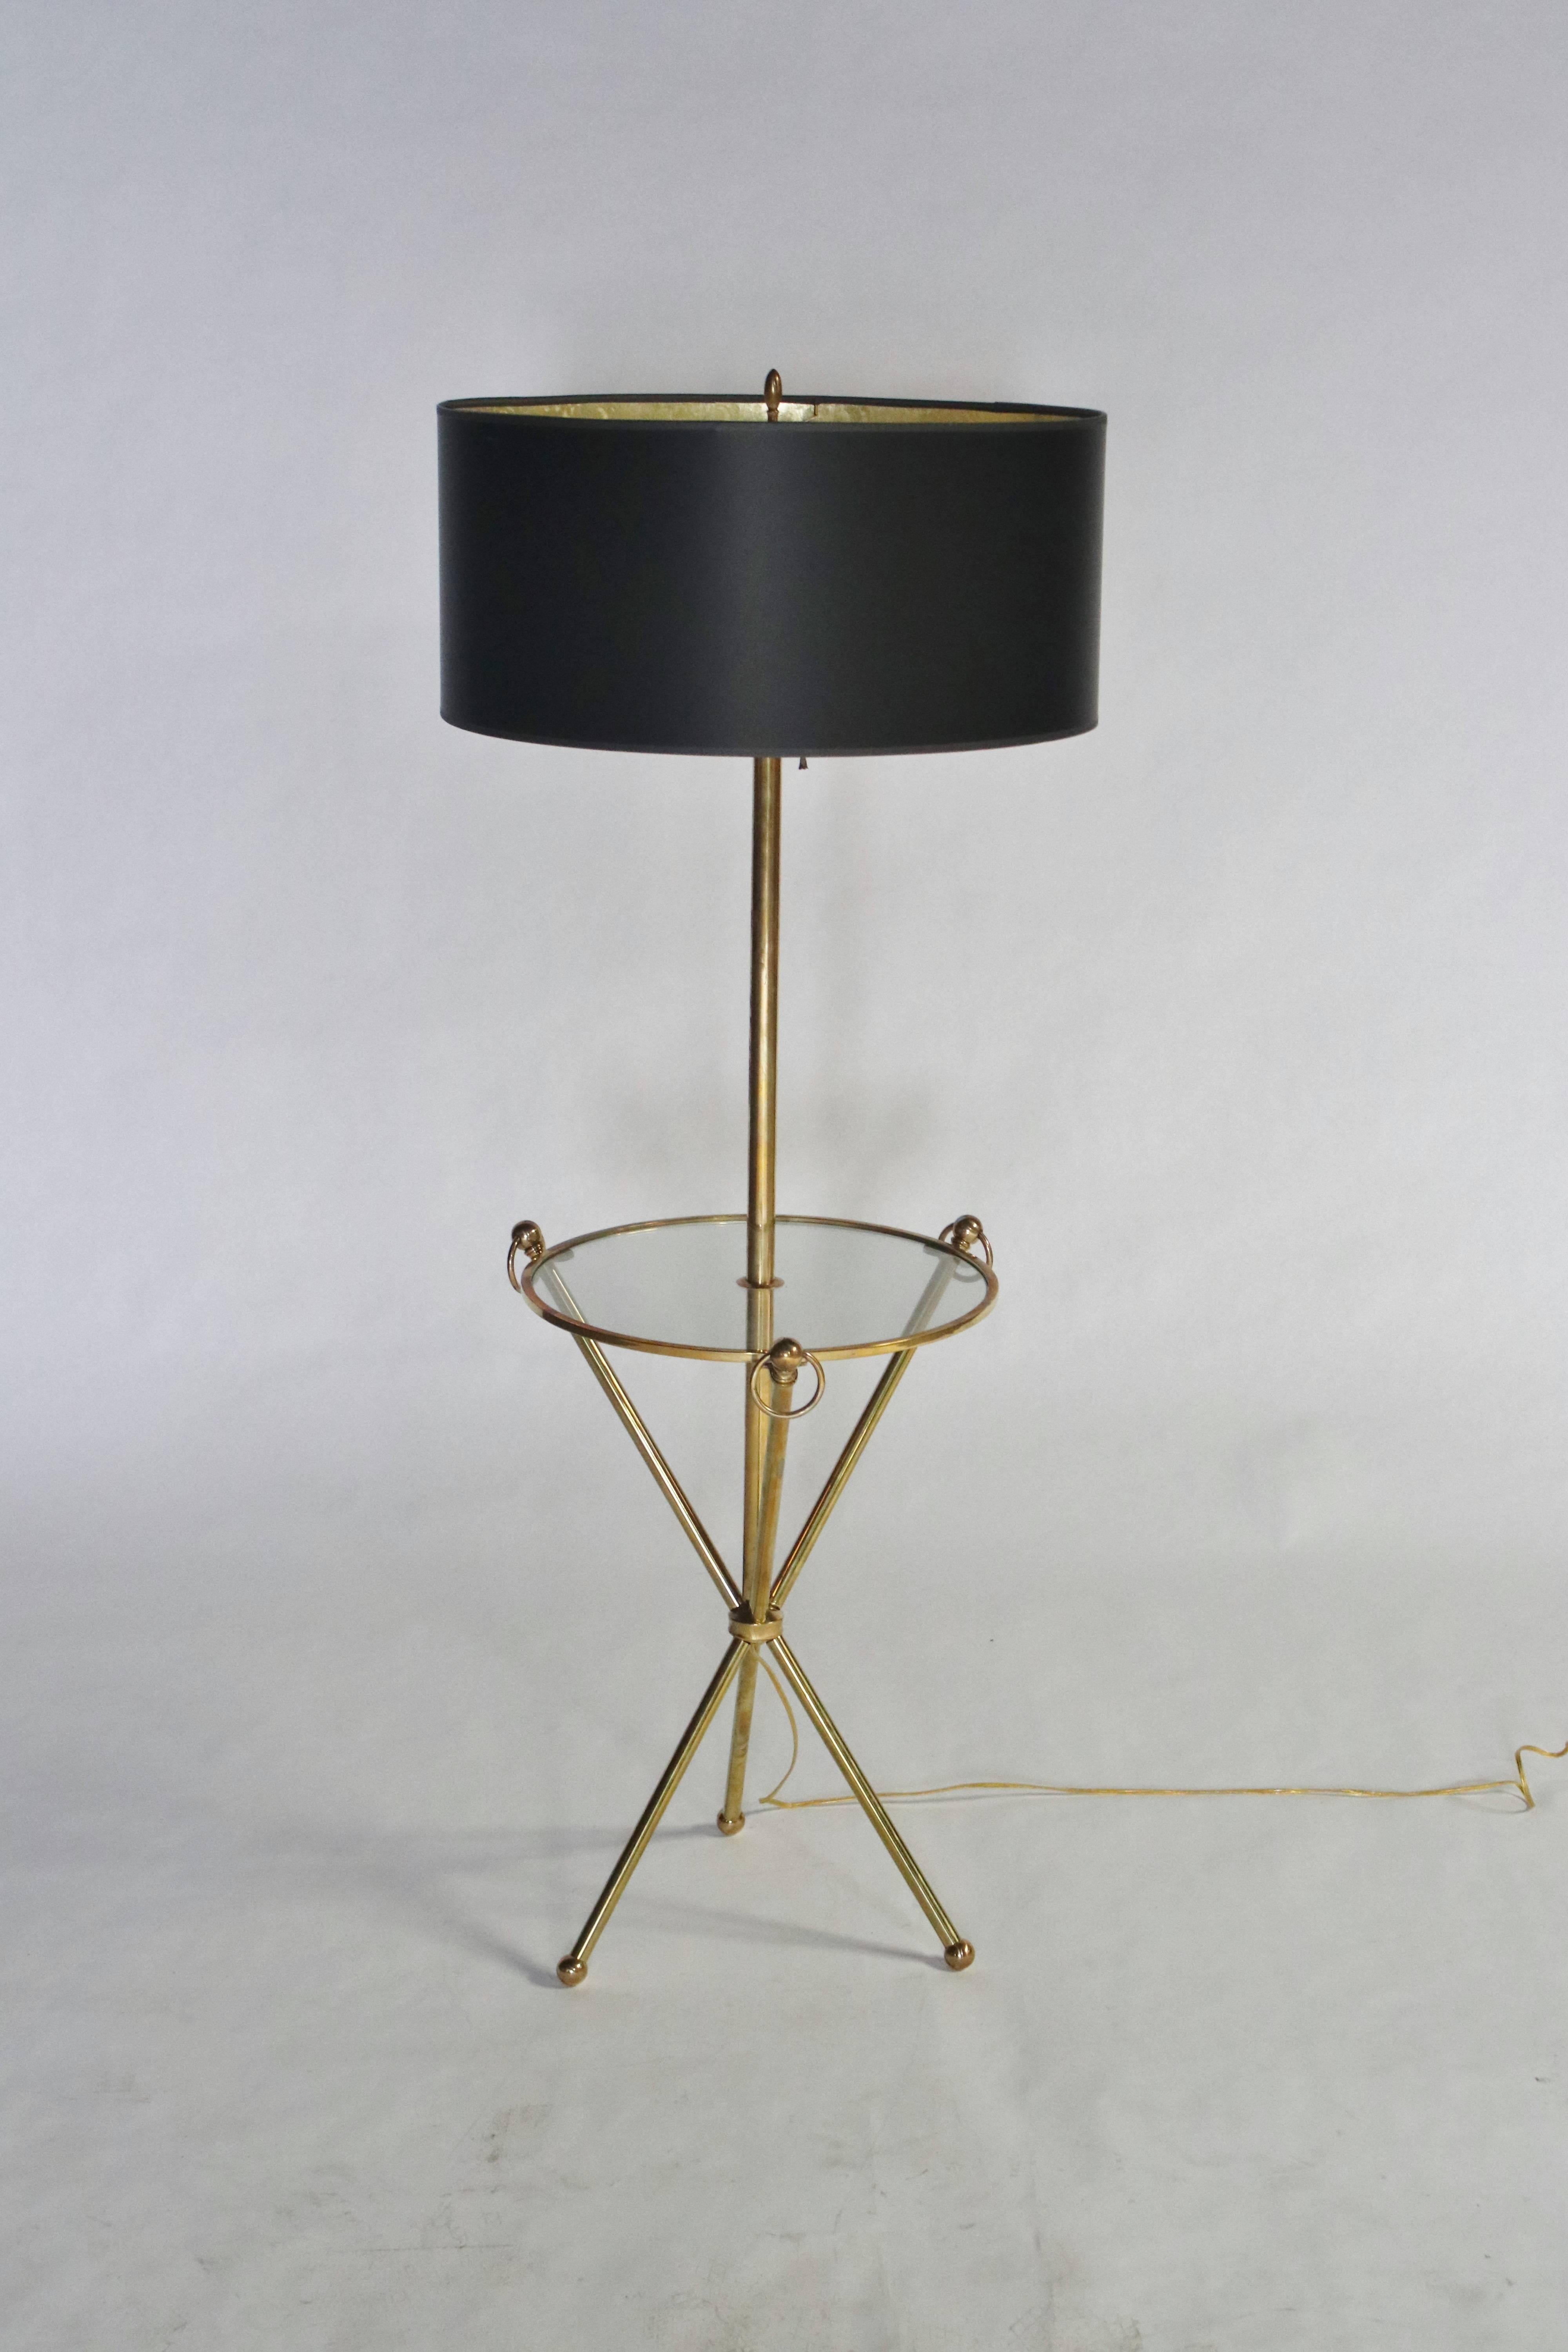 Midcentury brass and glass tripod floor lamp with loops handles, glass table and brass ball feet. Topped with a new custom black drum shade (21